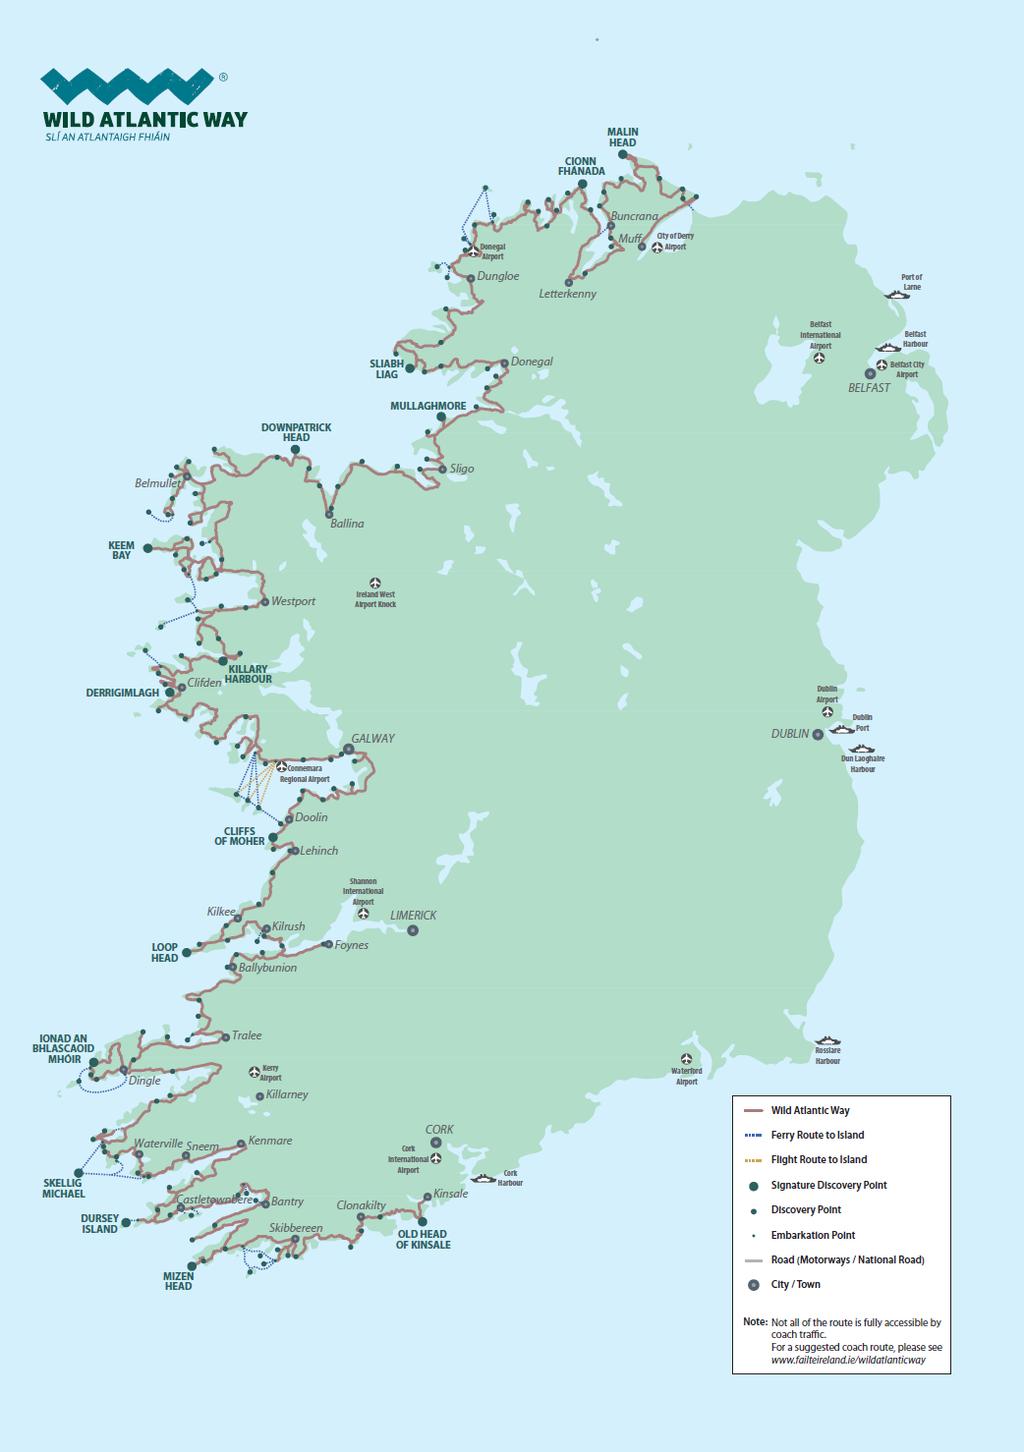 The route itself is the magnet or calling card to gain the attention of the international visitor, and acts as a device to entice people to the west of Ireland.